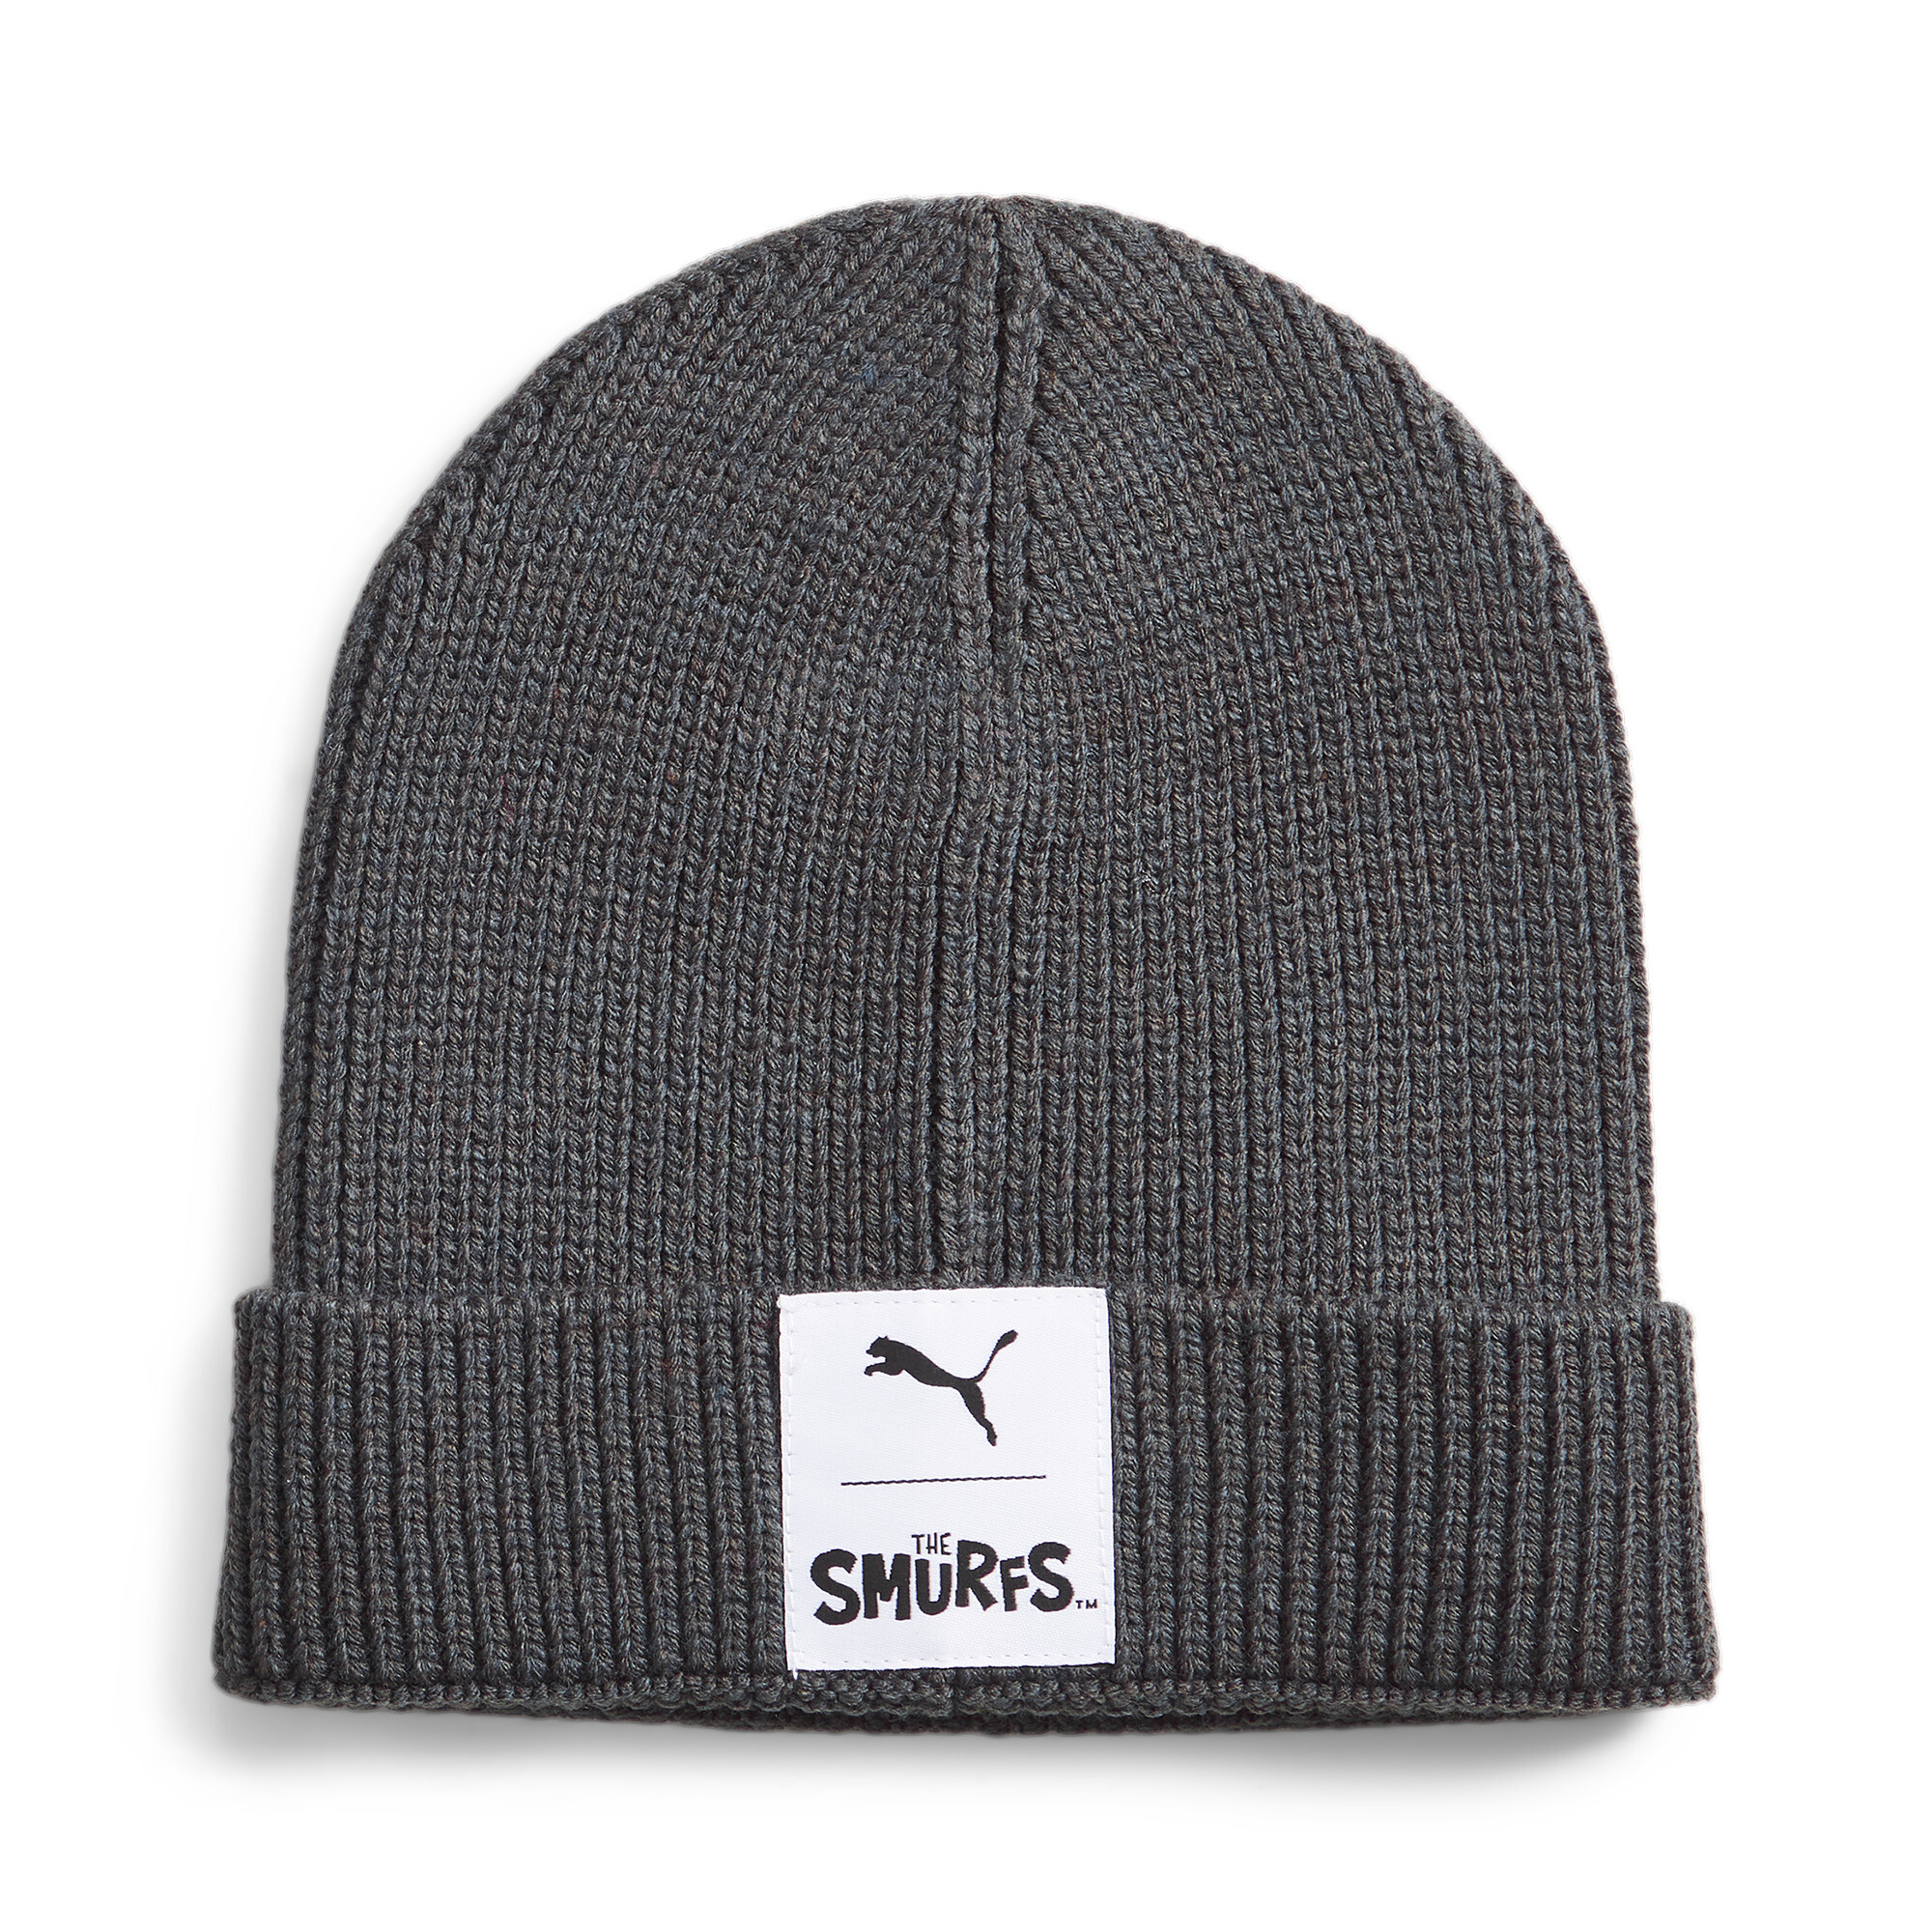 PUMA X THE SMURFS Beanie In 30 - Gray, Size Youth